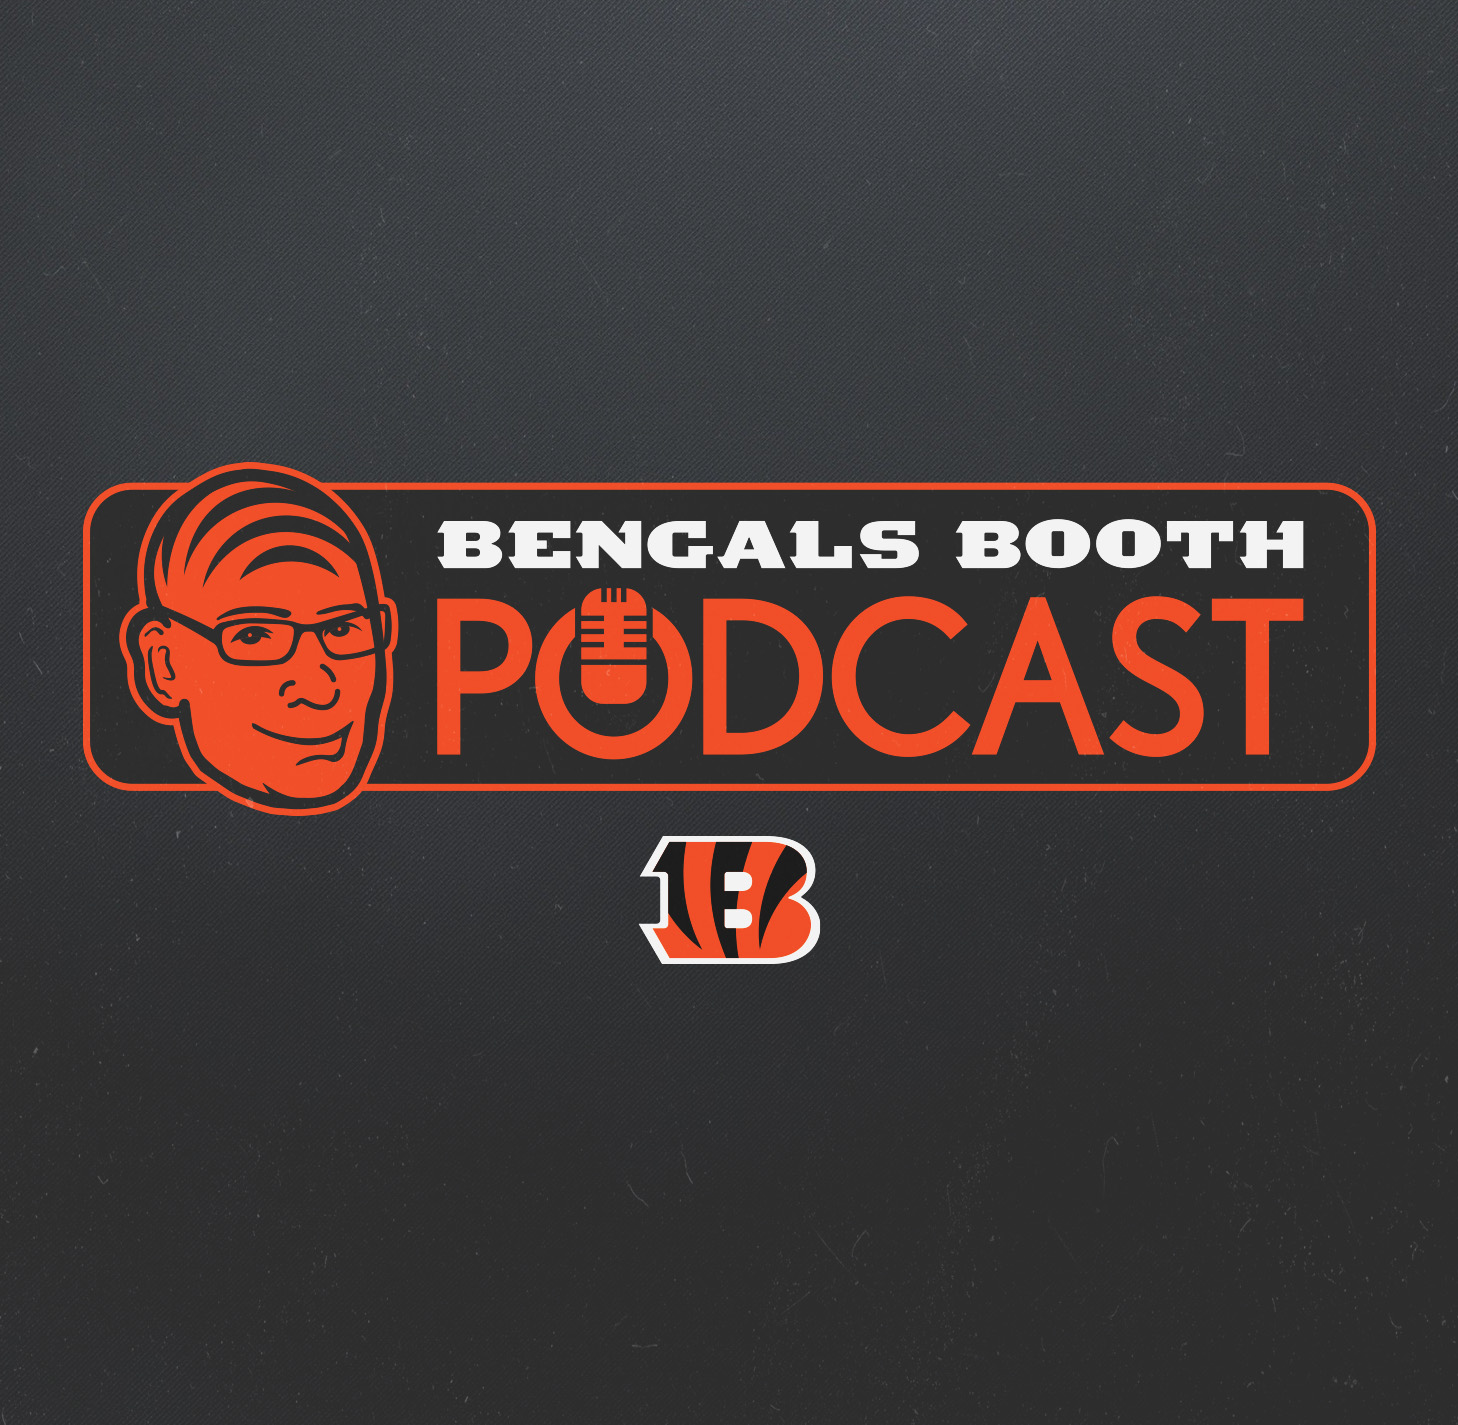 Bengals Booth Podcast: So Special